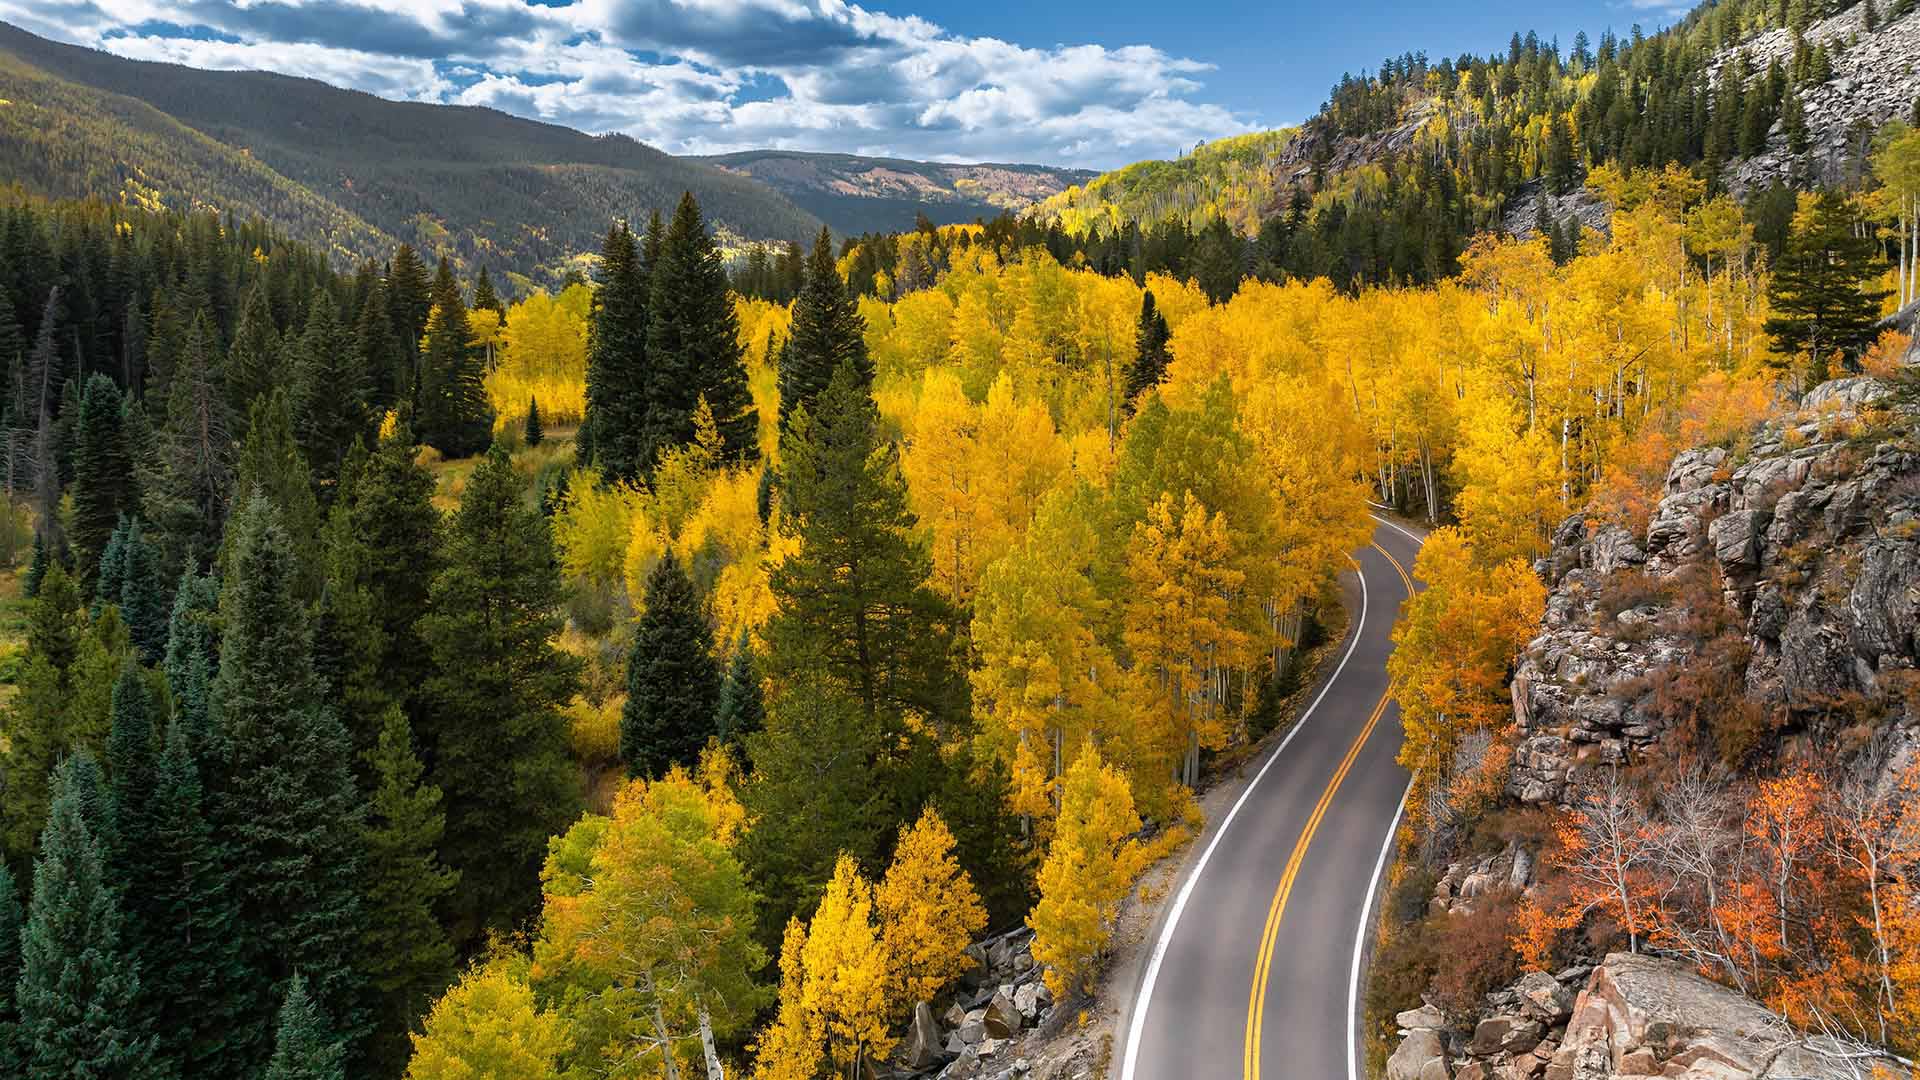 Best trails to see fall foliage (and get some exercise)